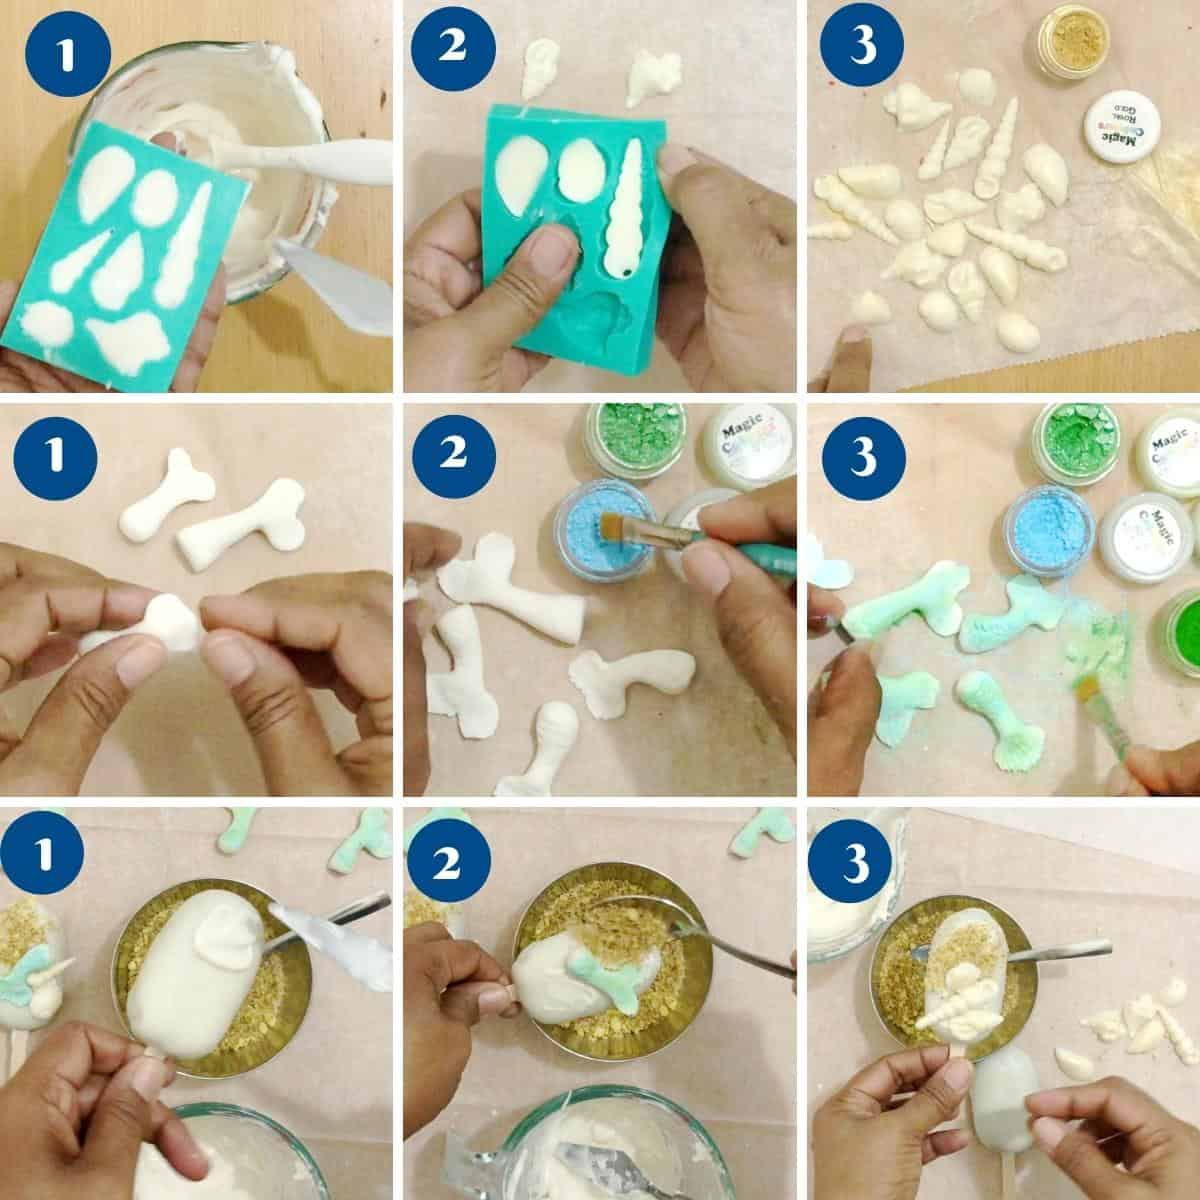 Progress pictures decorating cake popsicles.